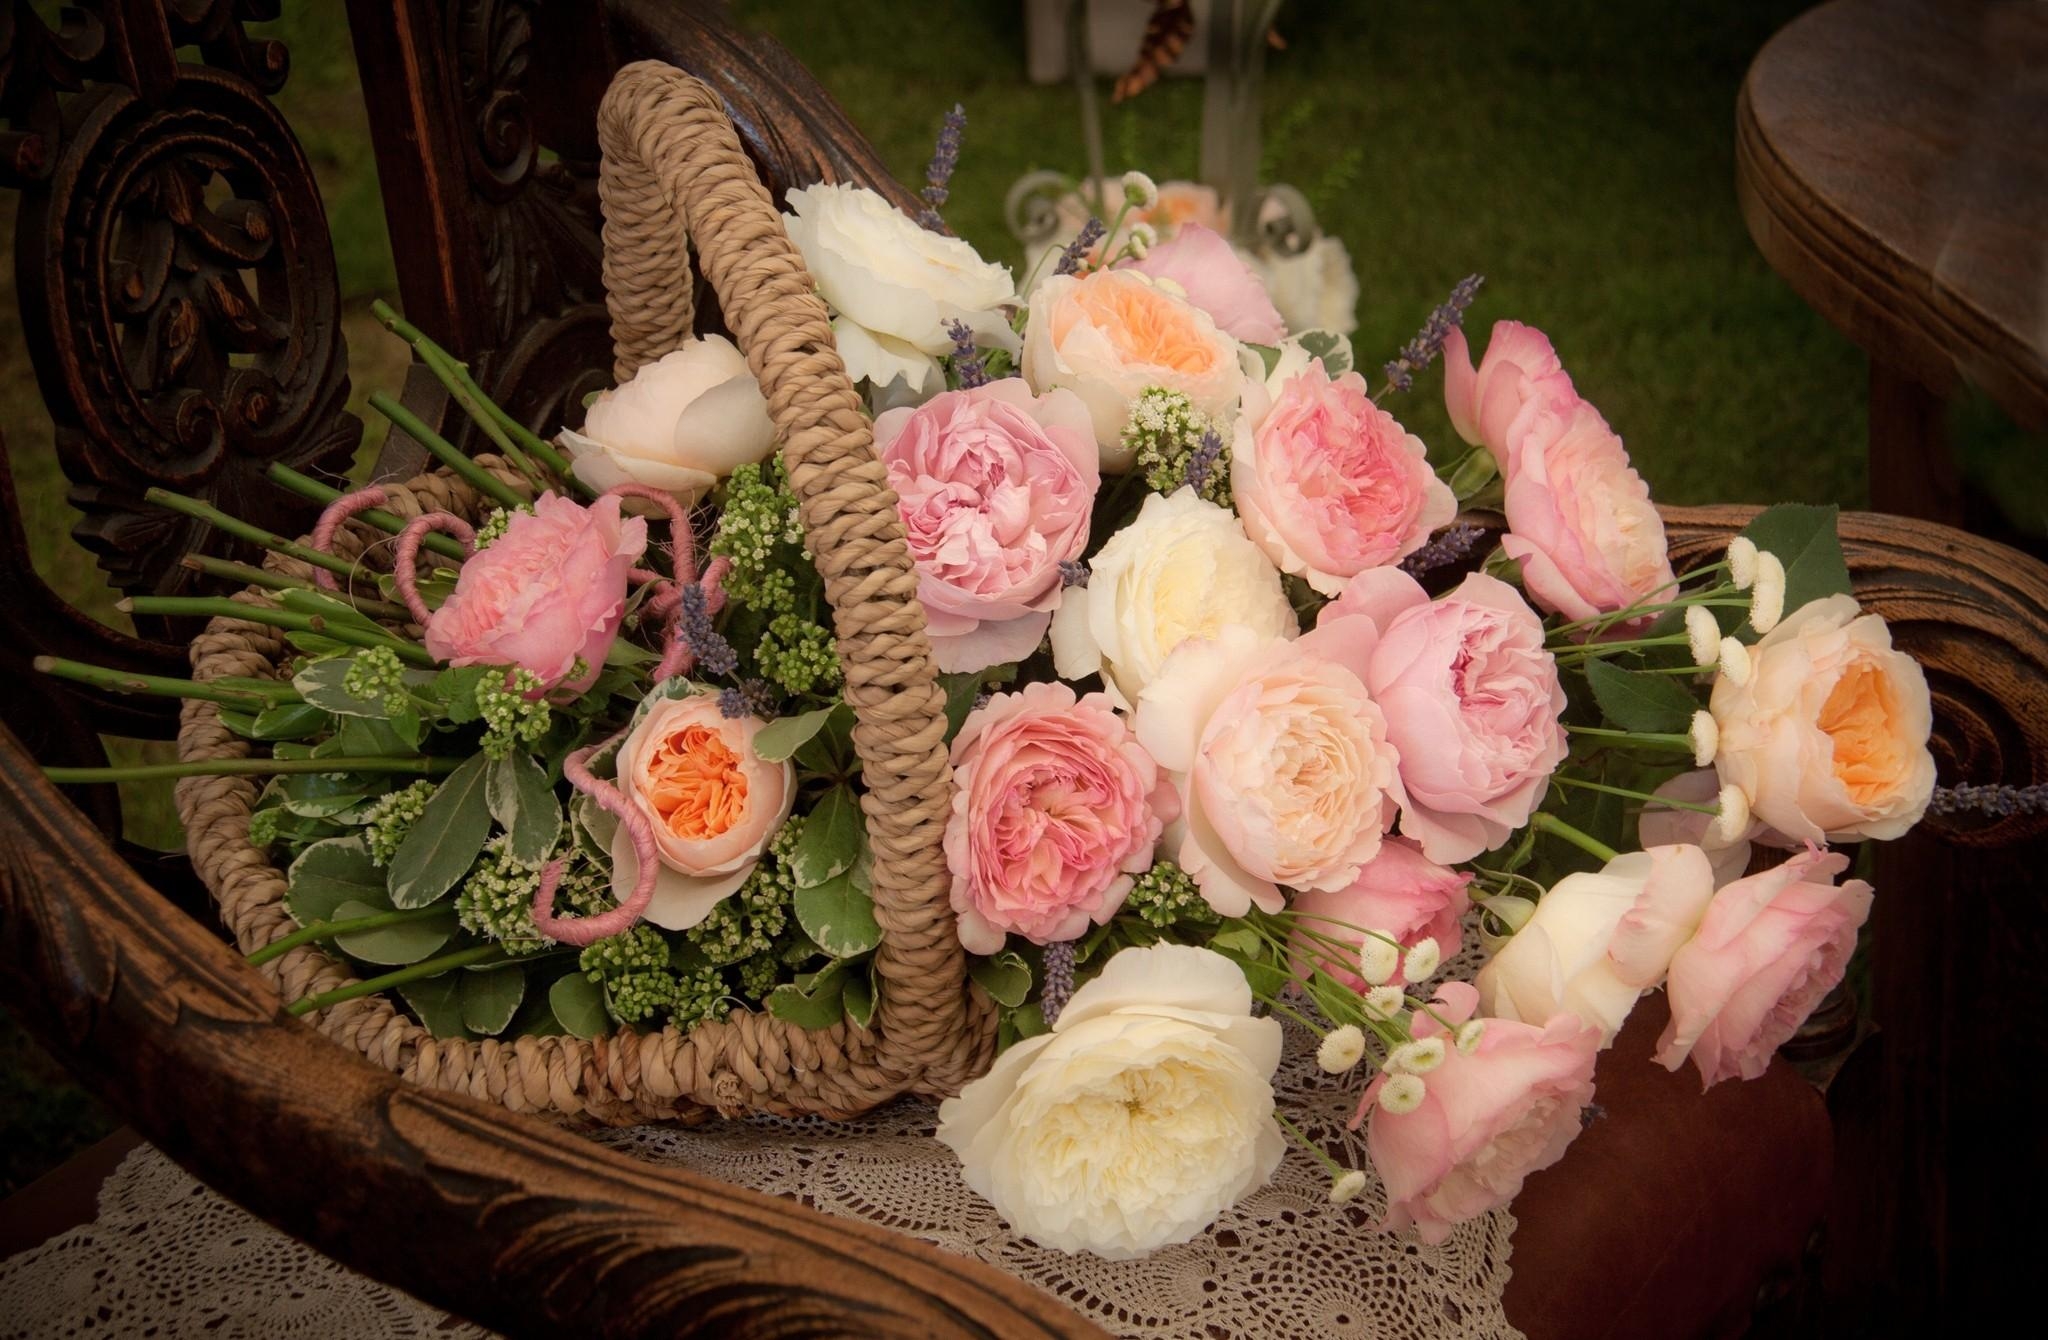 composition, typography, flowers, roses, registration, basket cellphone